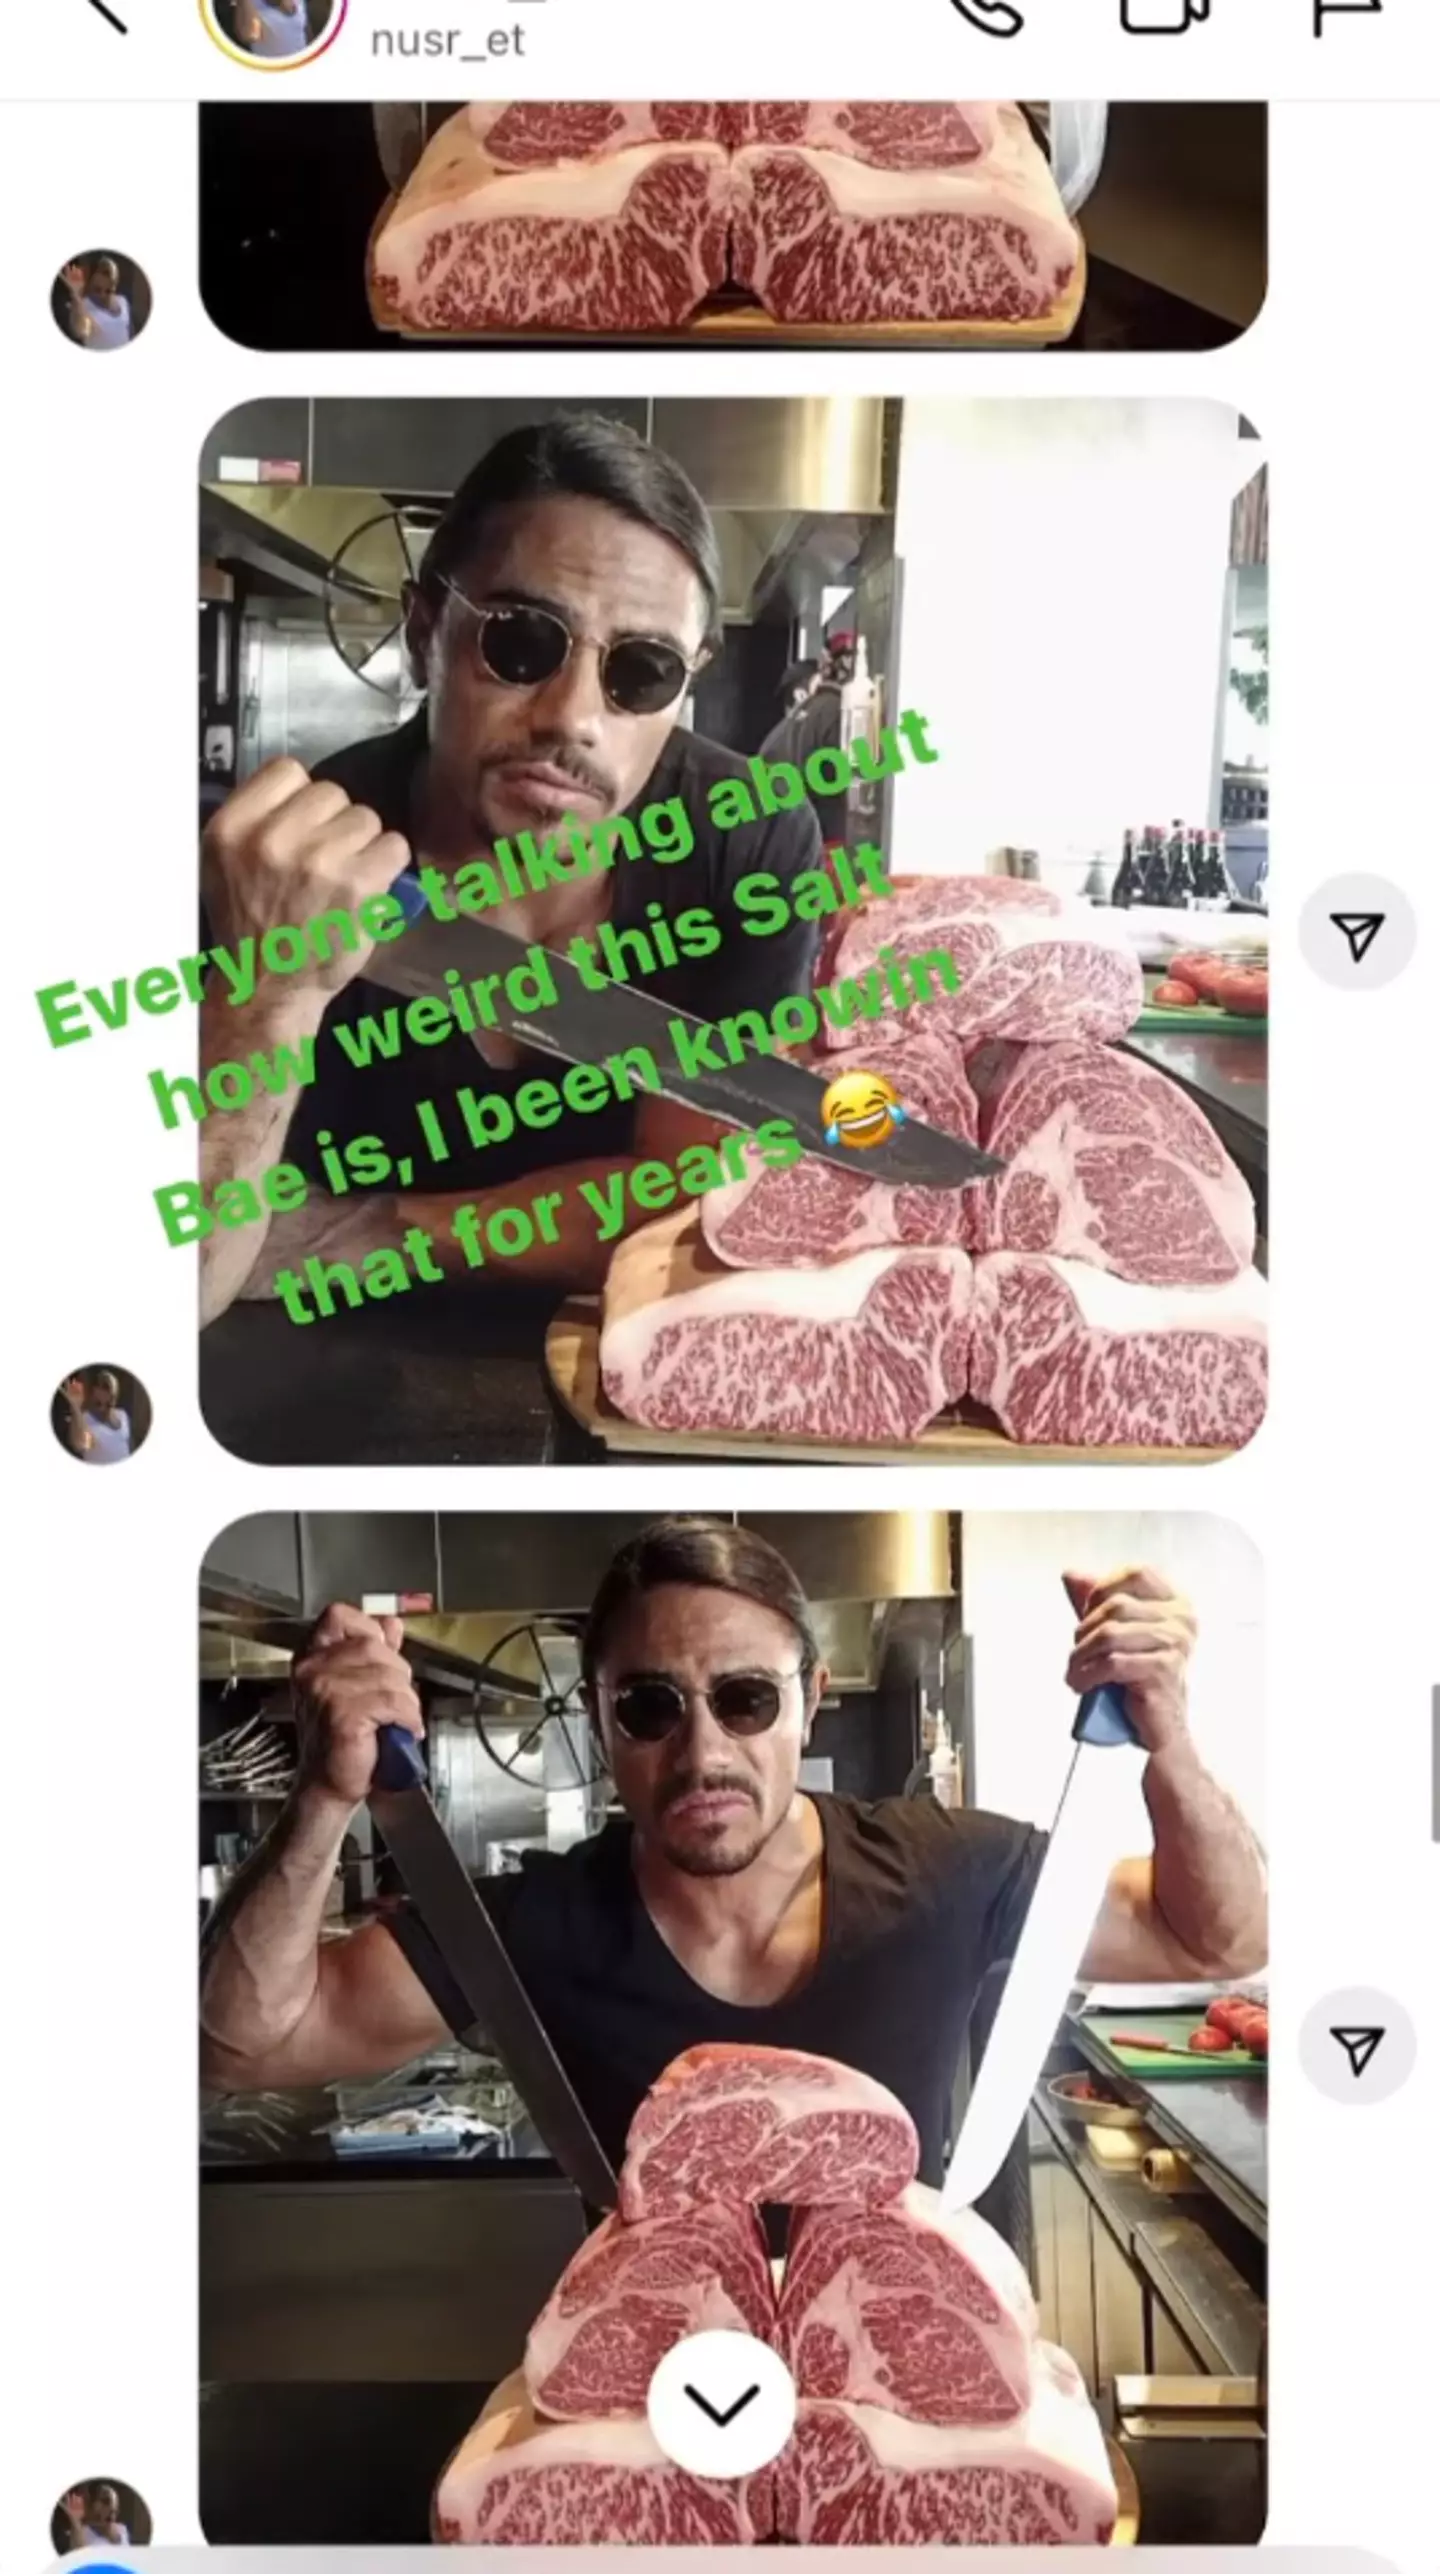 Salt Bae's DMs are certainly something.